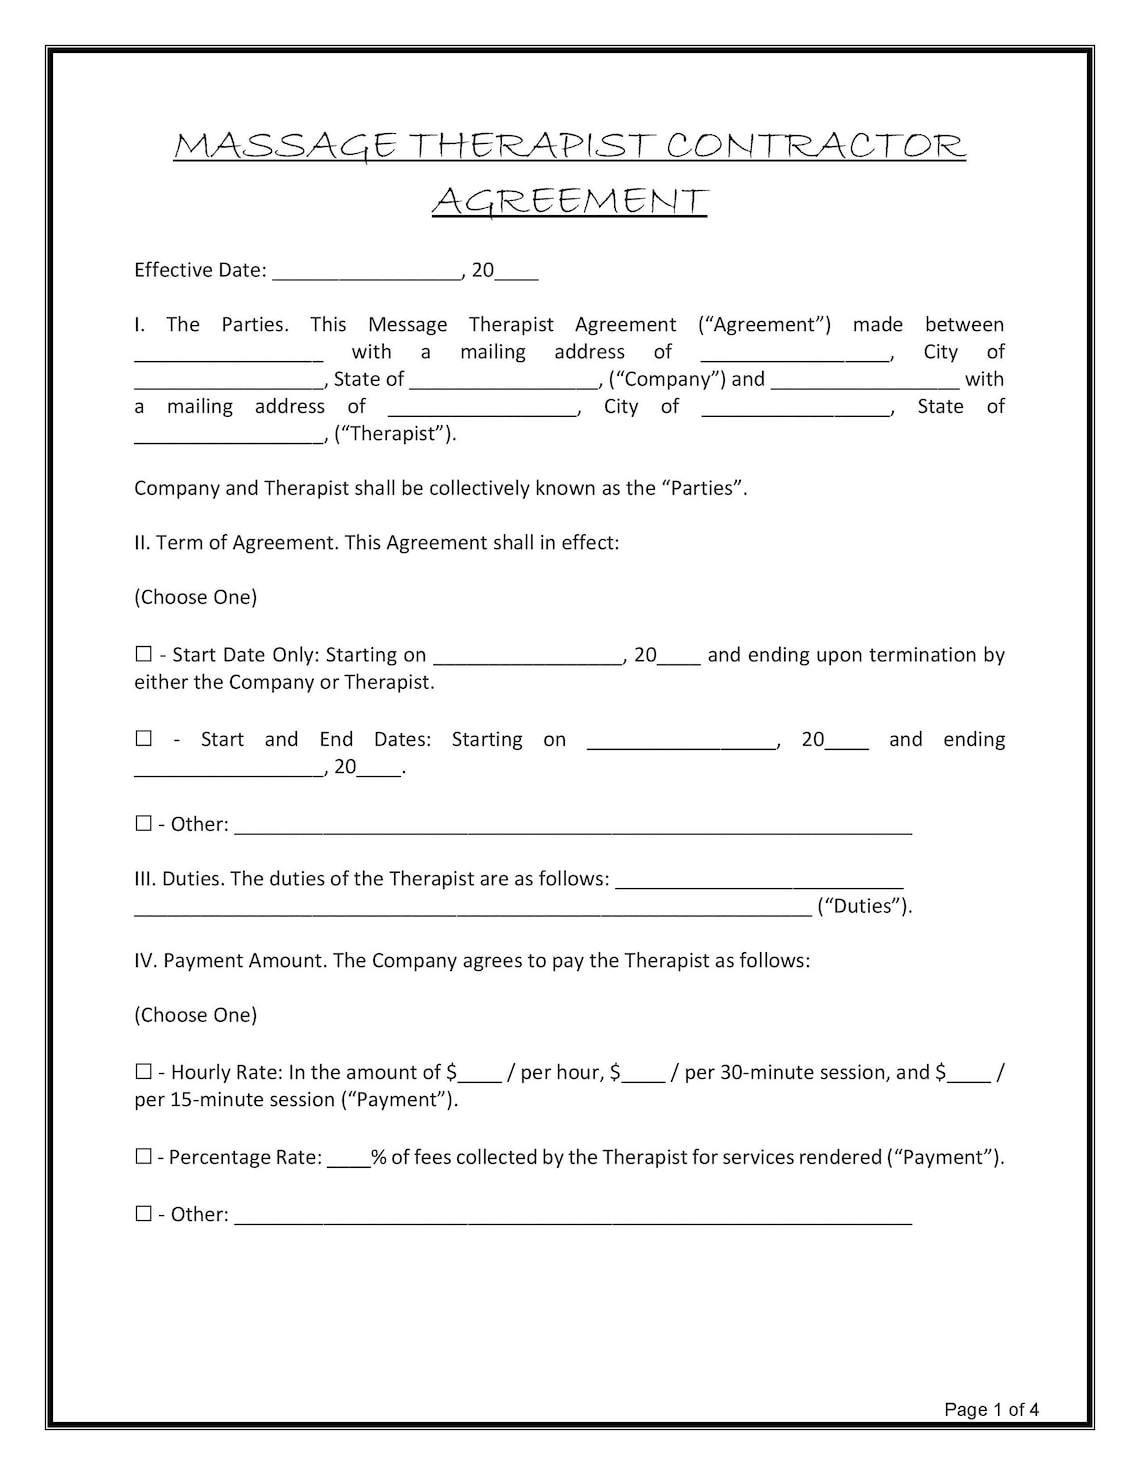 Easy To Edit Massage Therapist Contractor Agreement Etsy